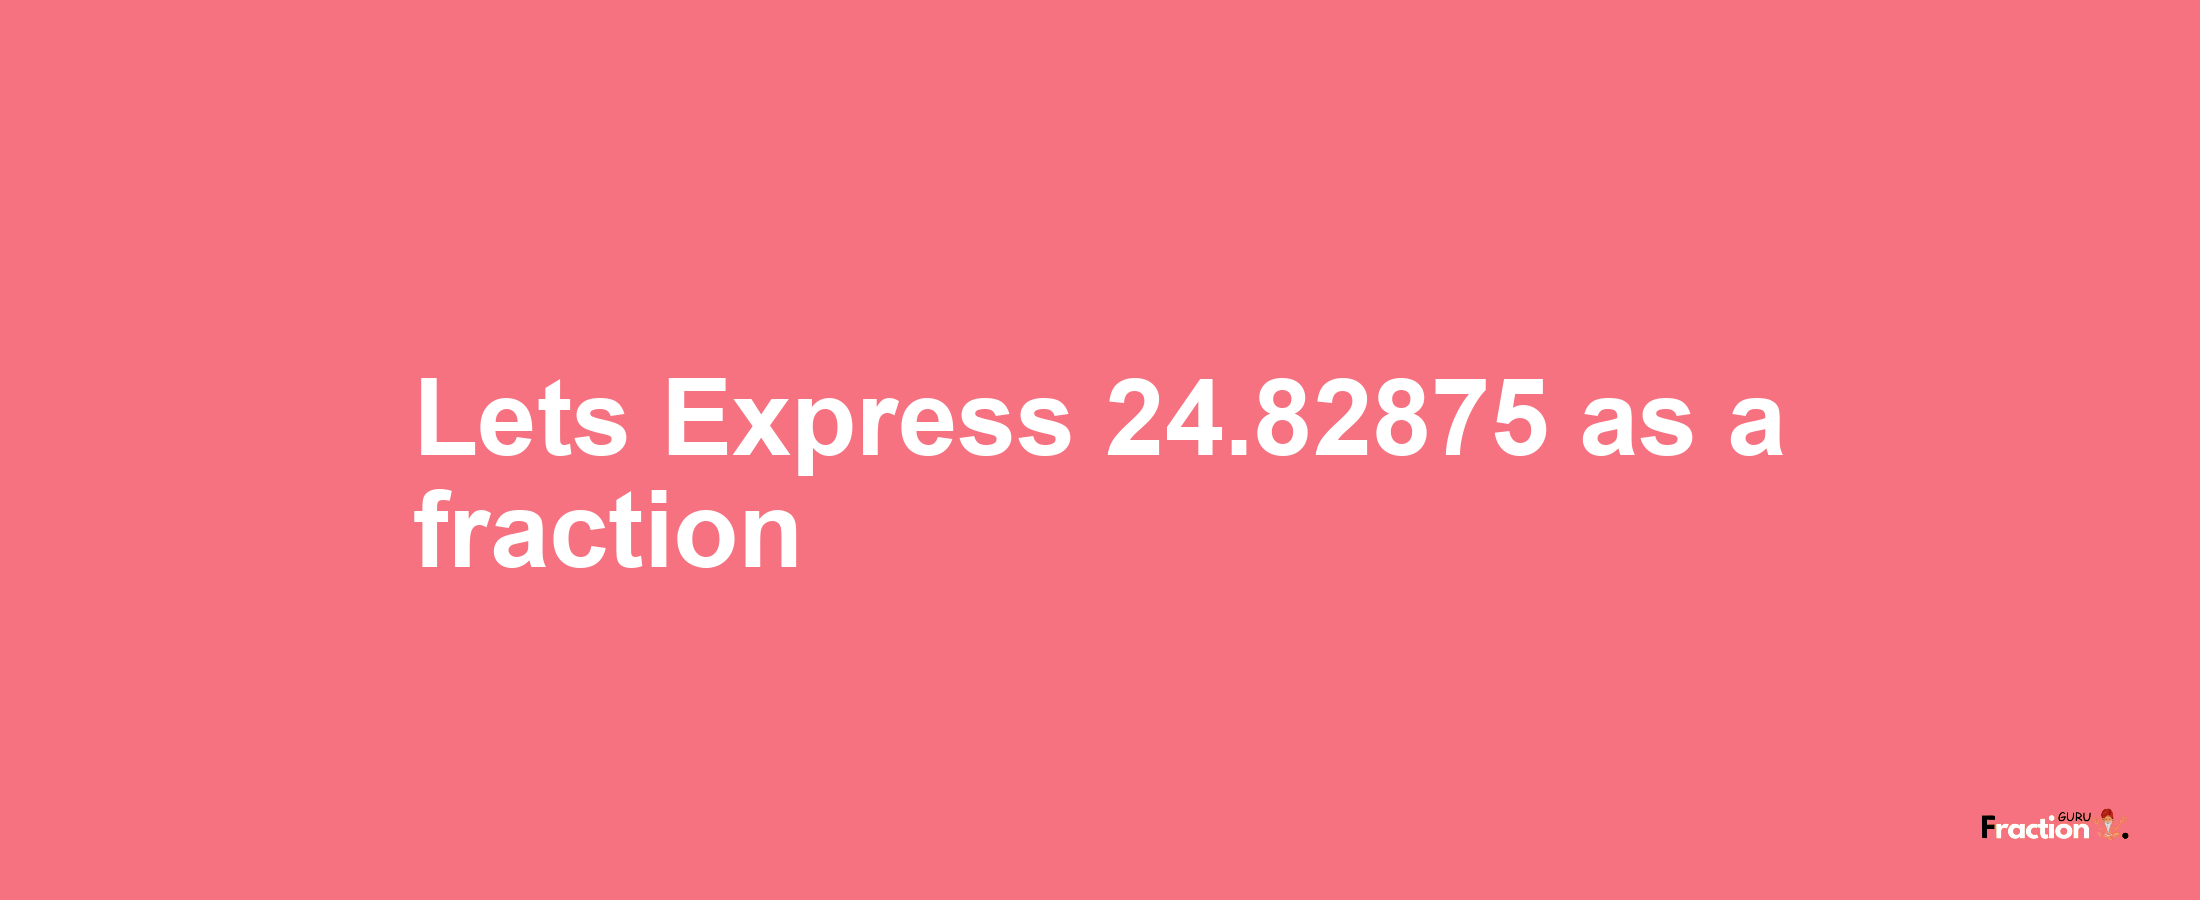 Lets Express 24.82875 as afraction